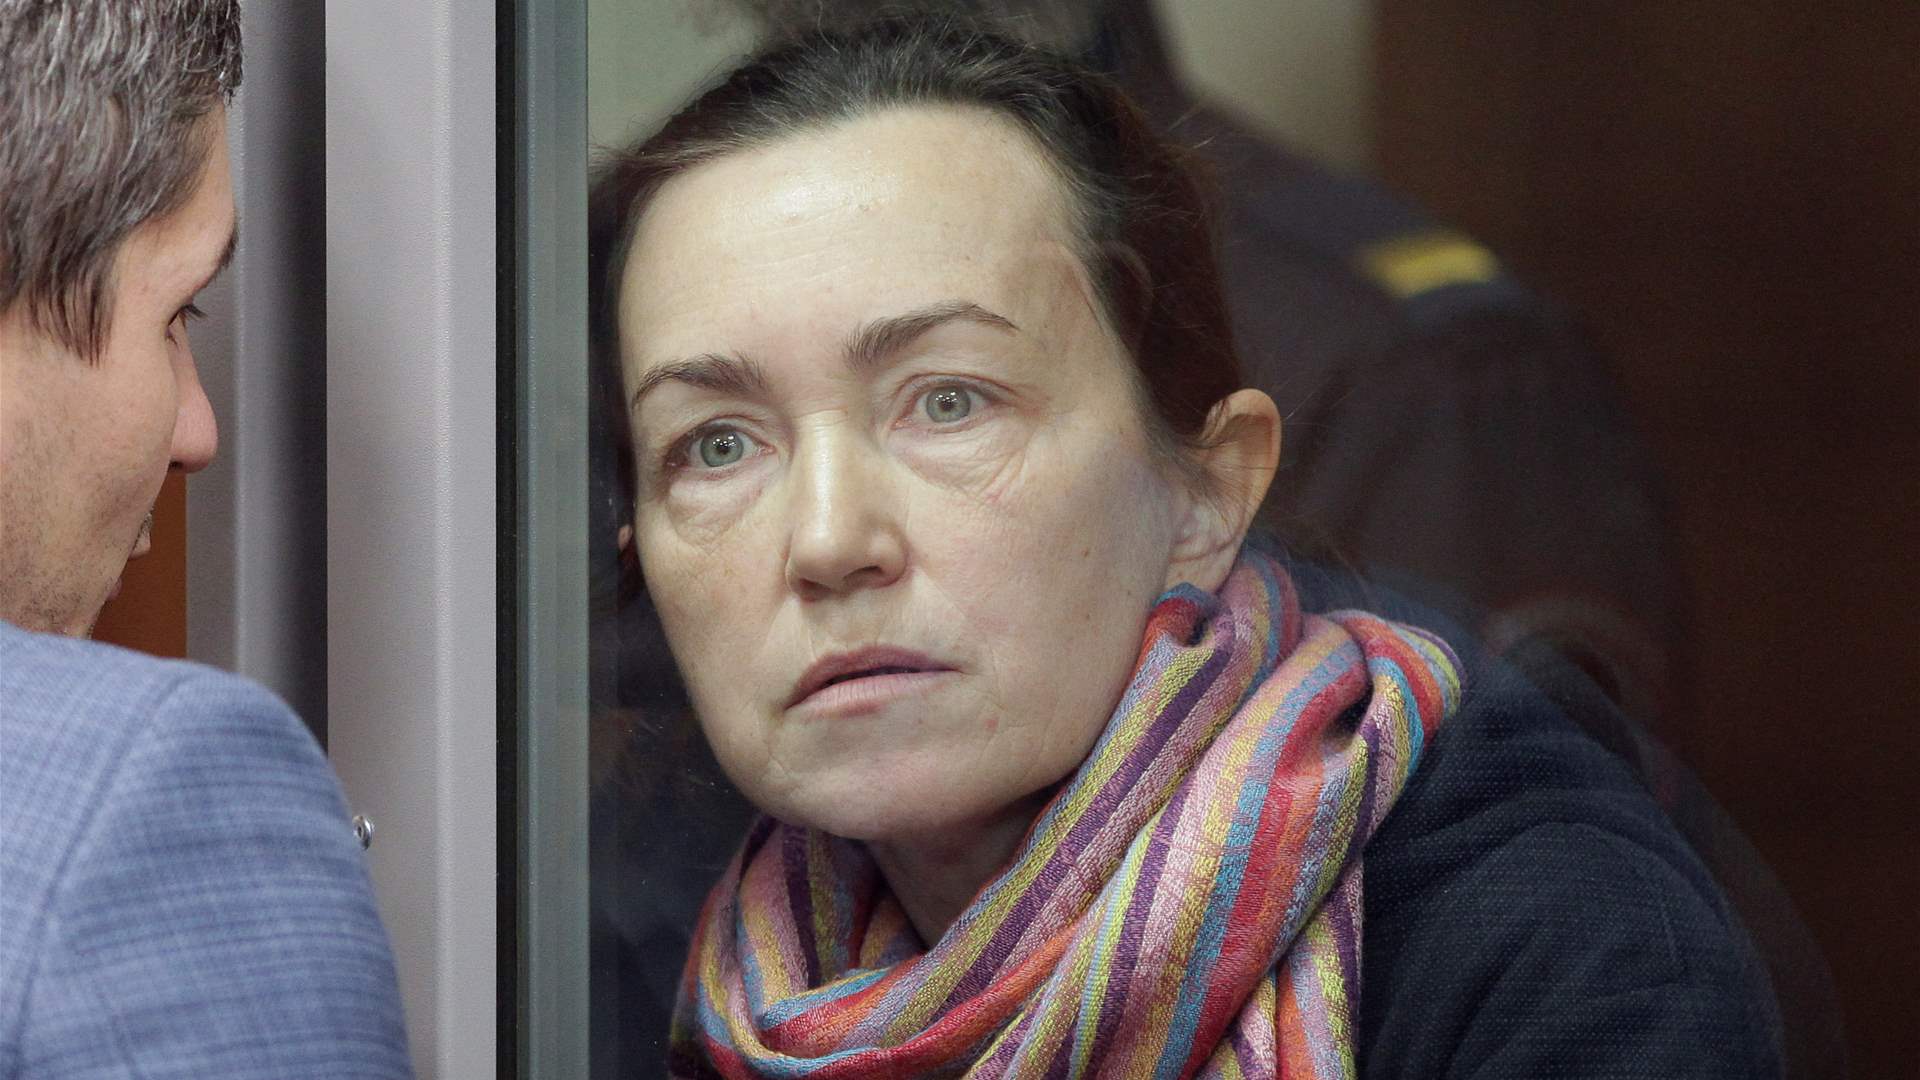 US embassy in Moscow asks Russia to free jailed Russian-American journalist Kurmasheva